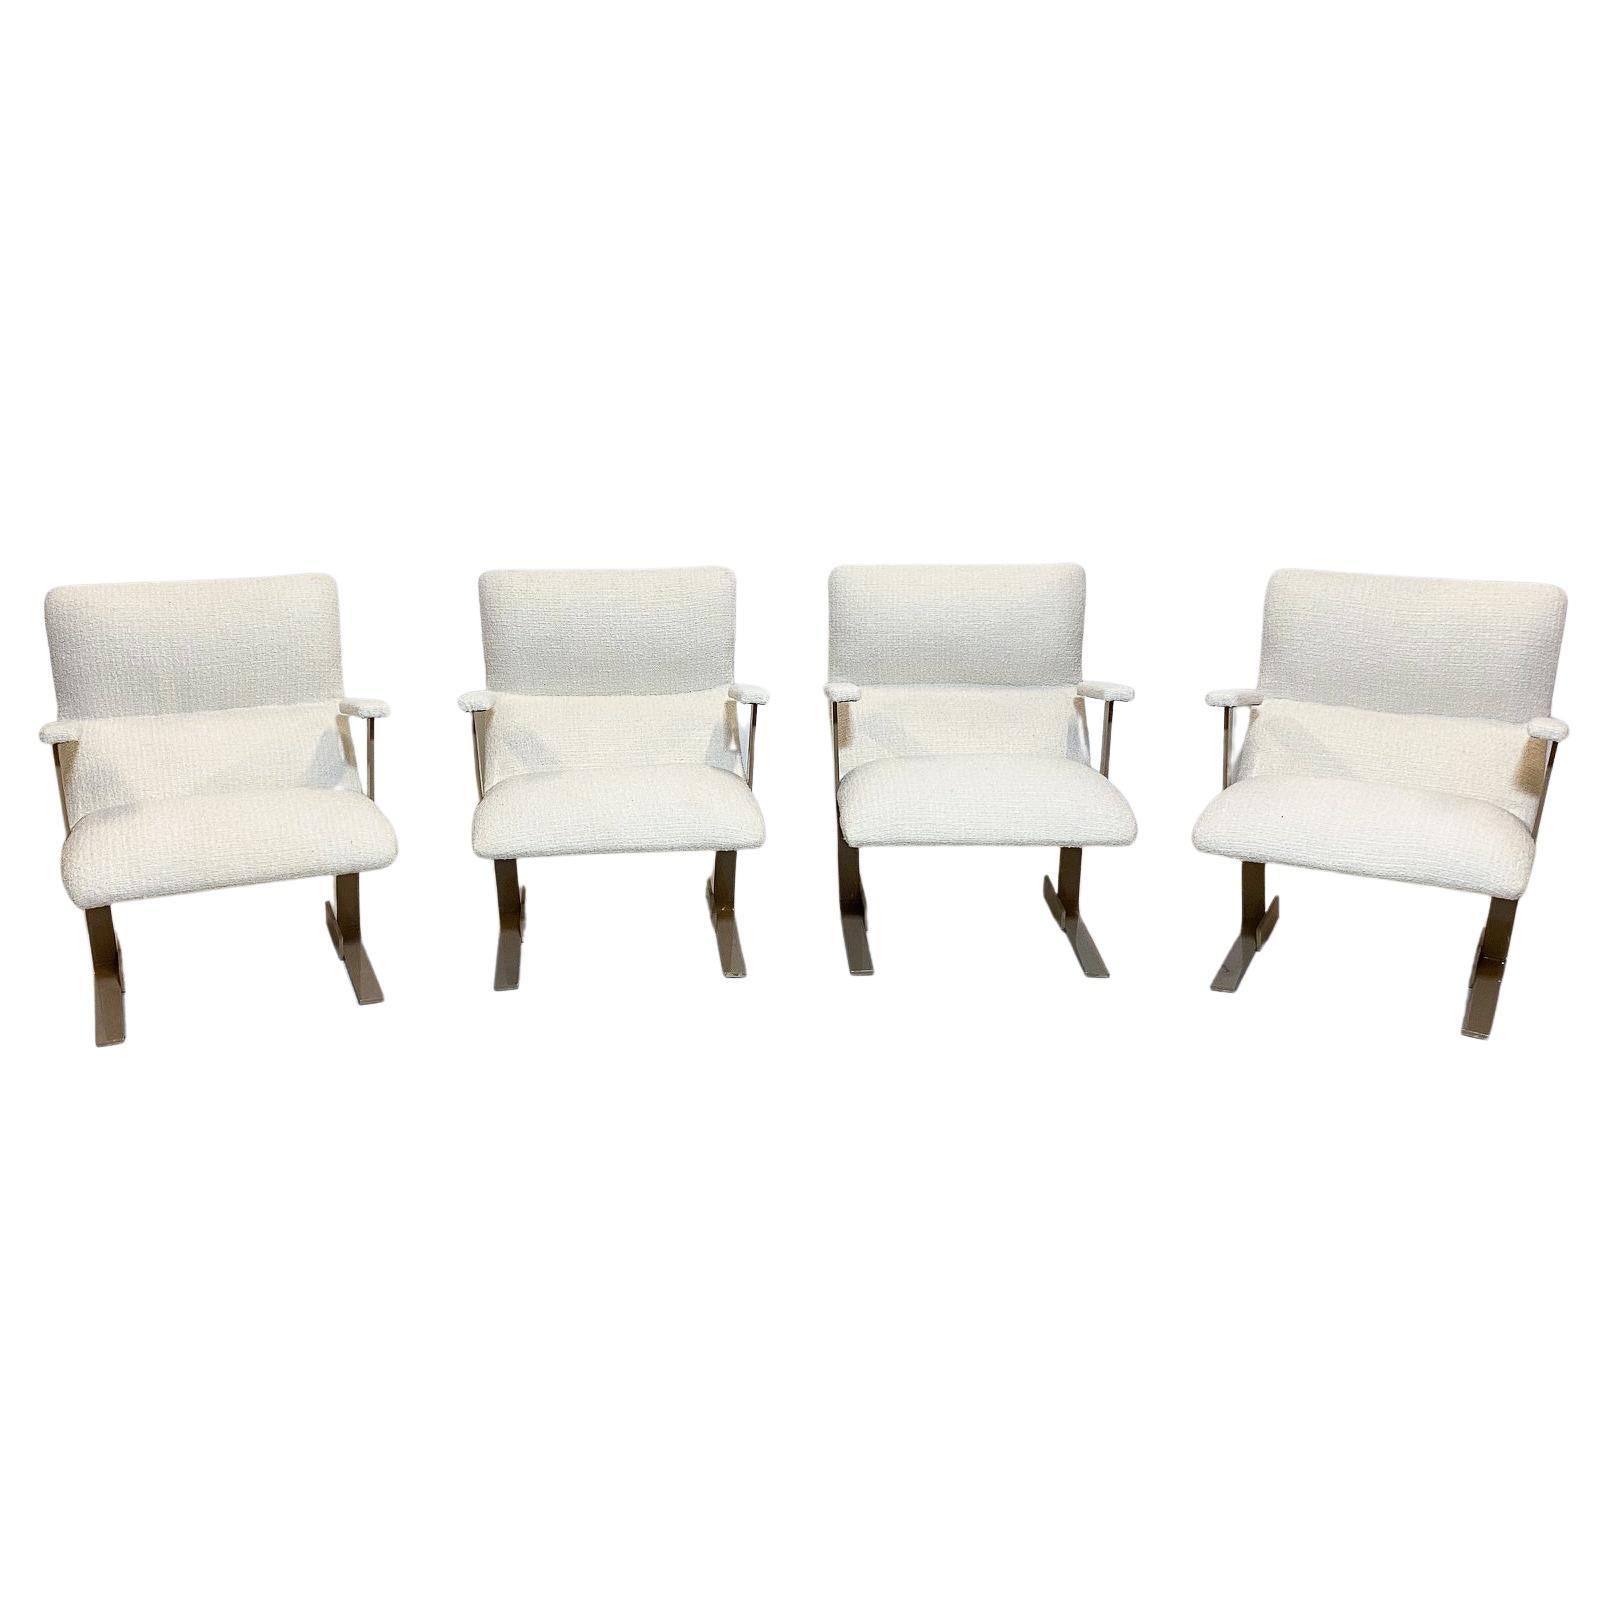 Mid-Century Modern Pair of Italian Armchairs, White Bouclette Fabric, 1970s For Sale